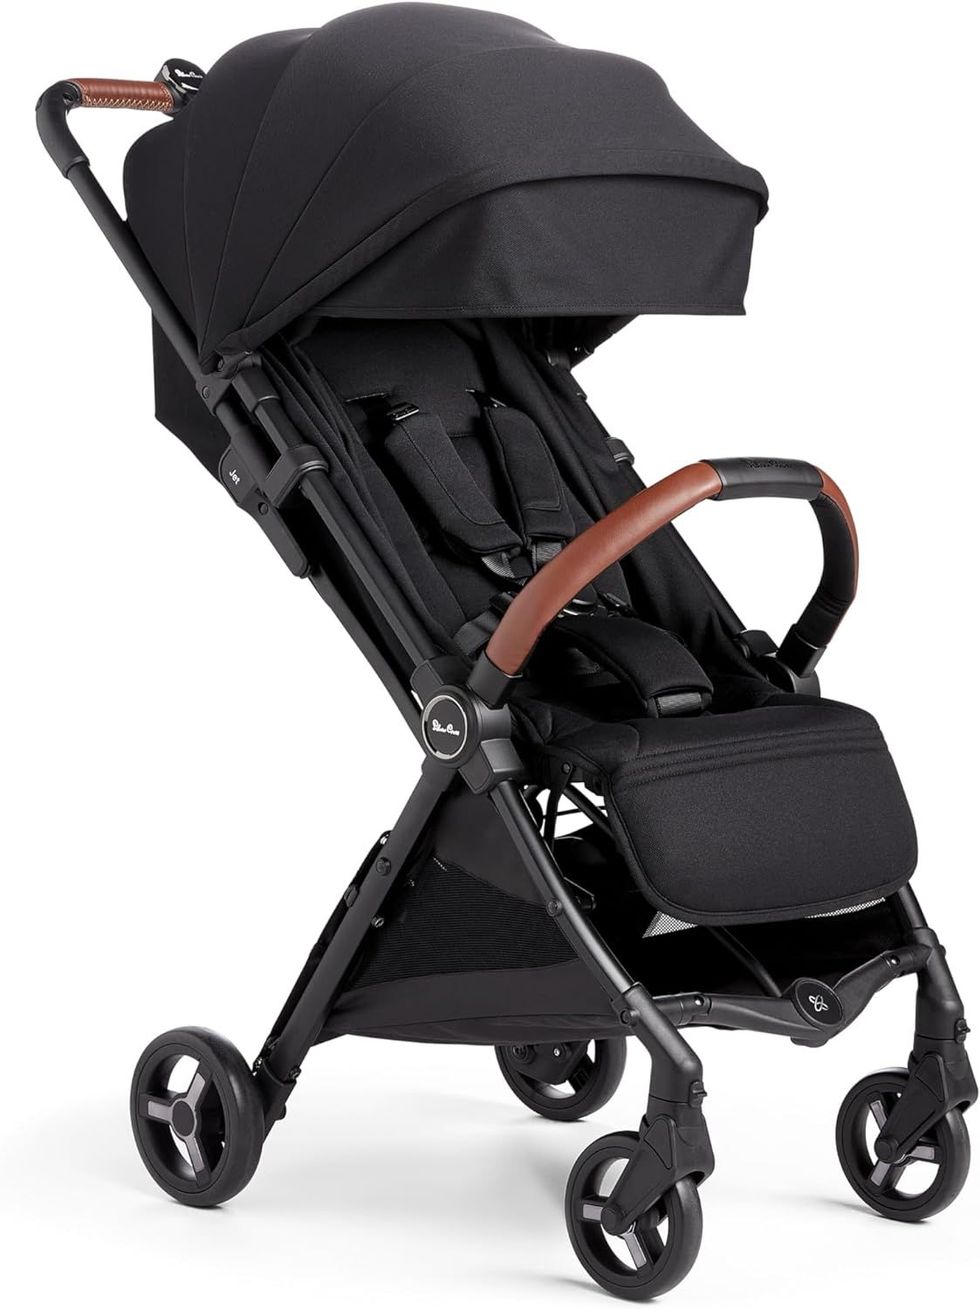 Jet 3 Compact Pushchair